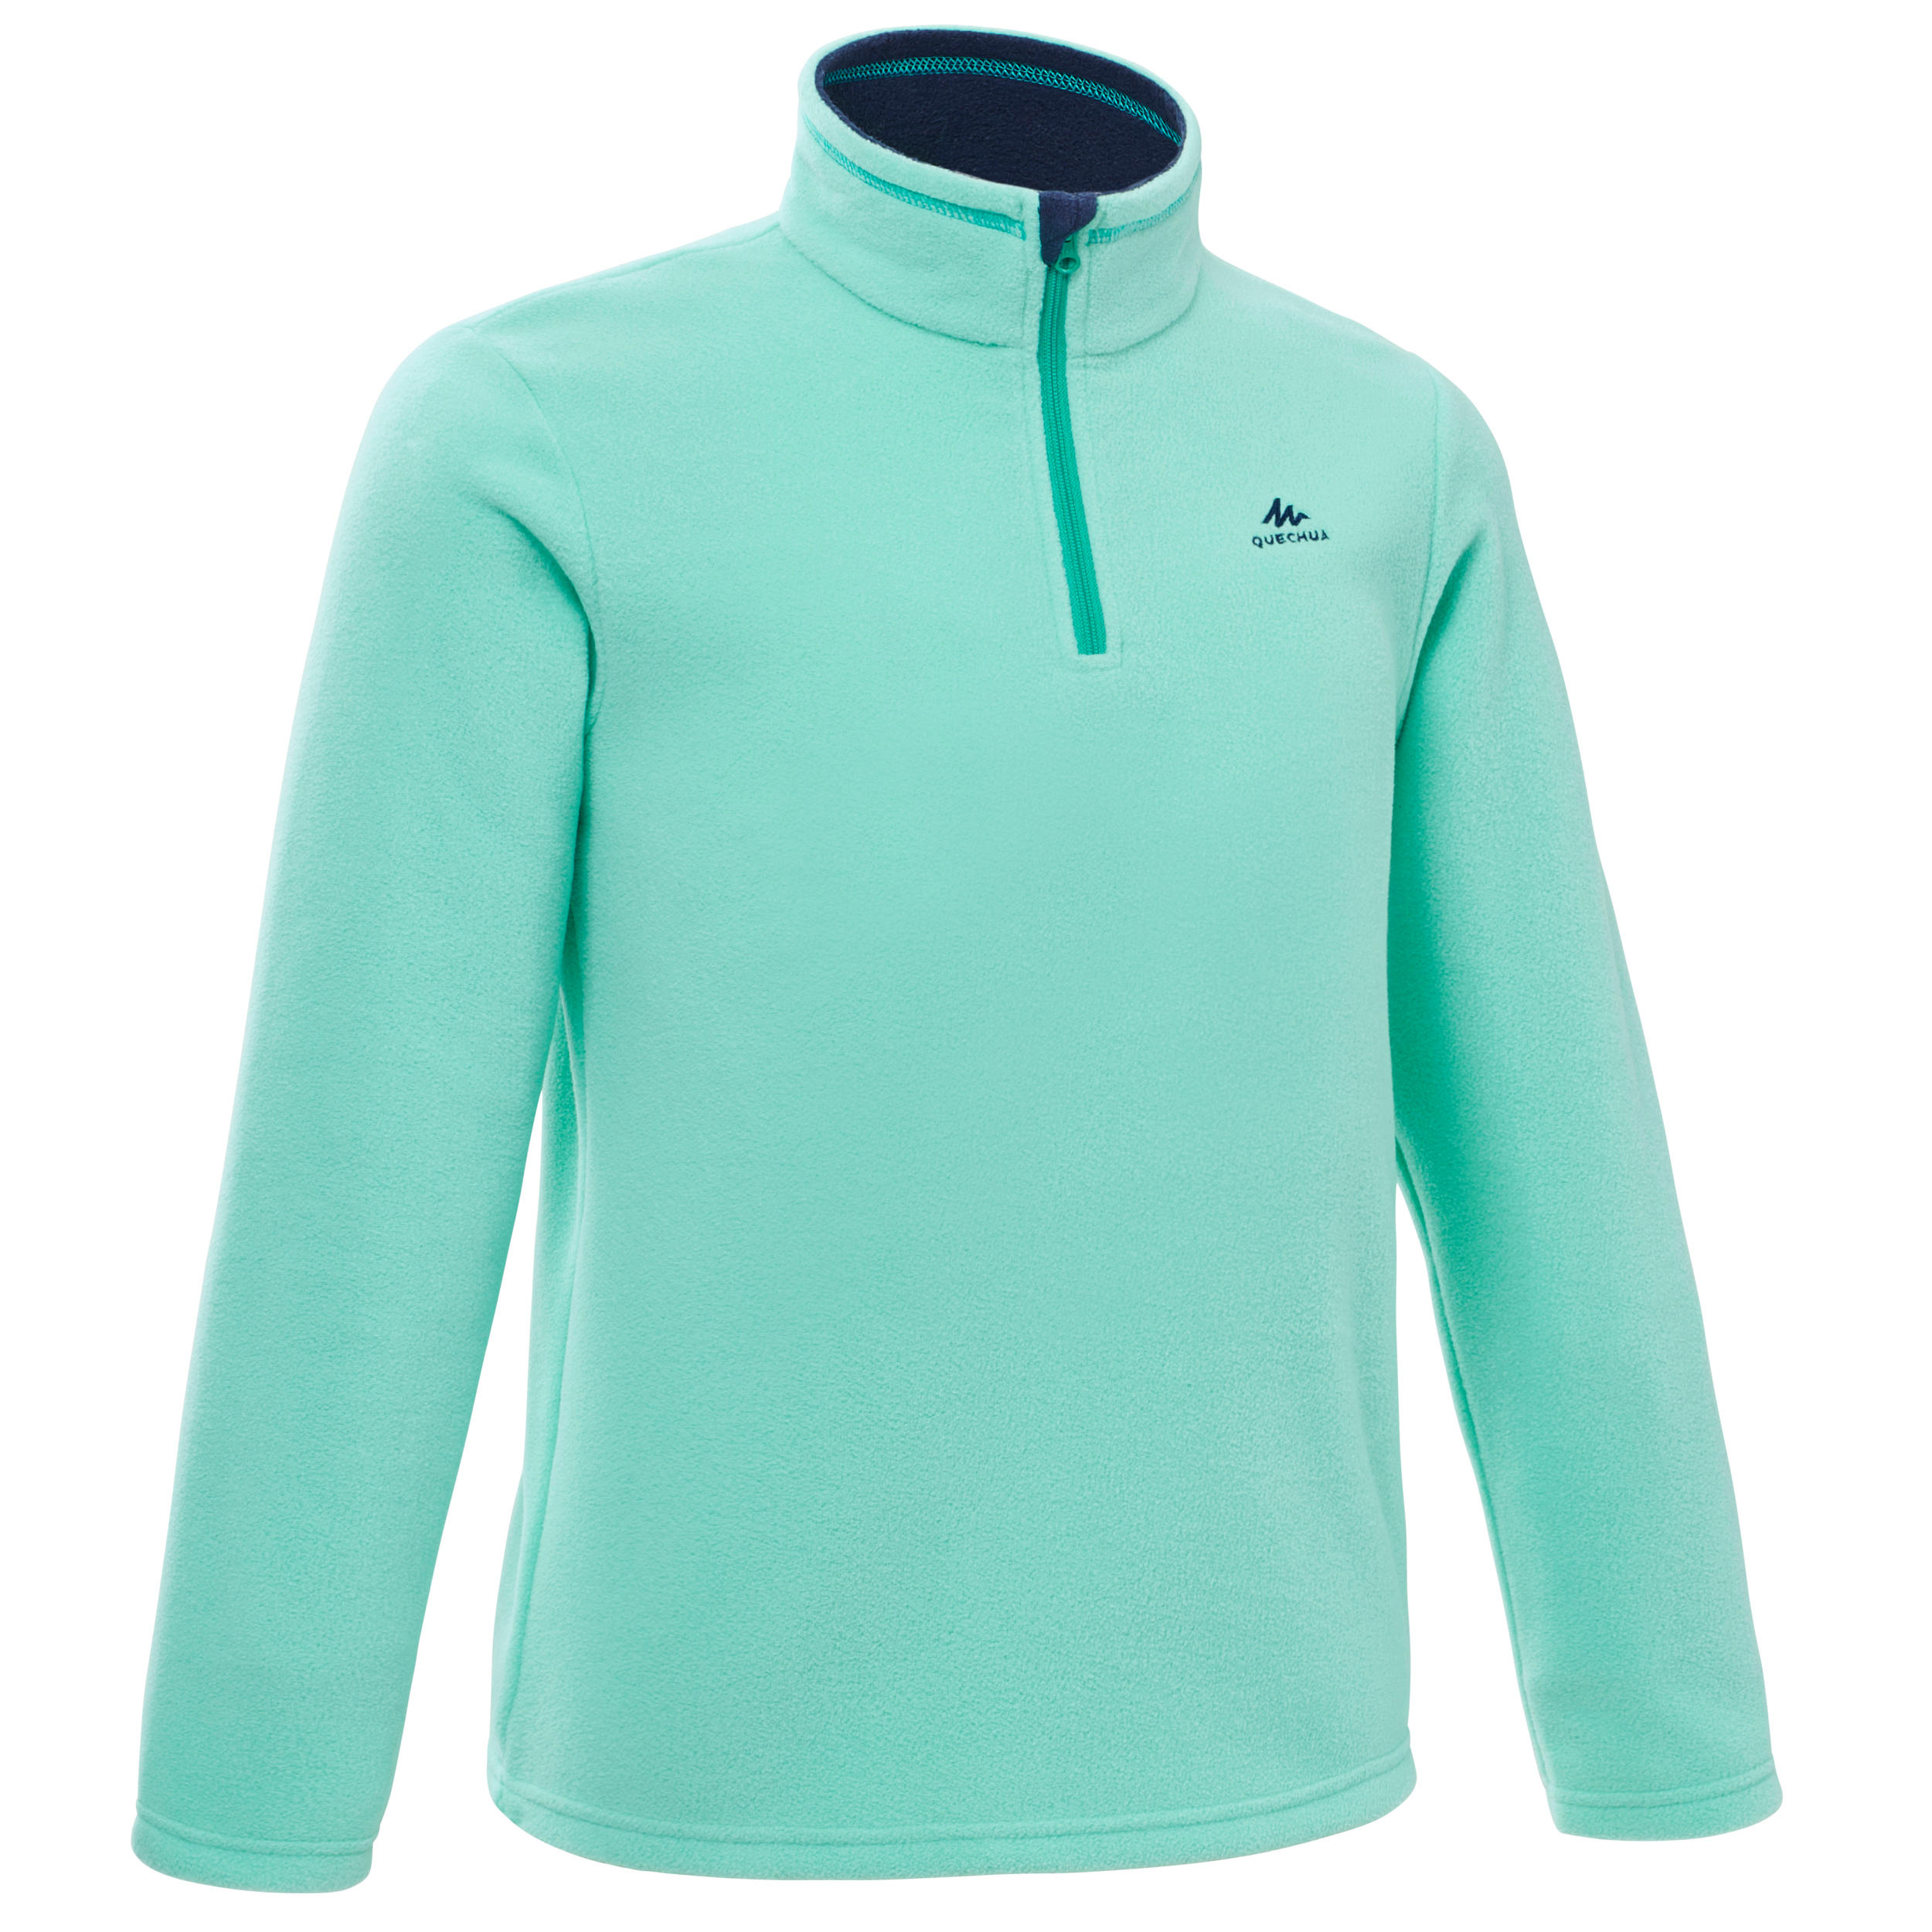 Kids Pullovers online at Decathlon India